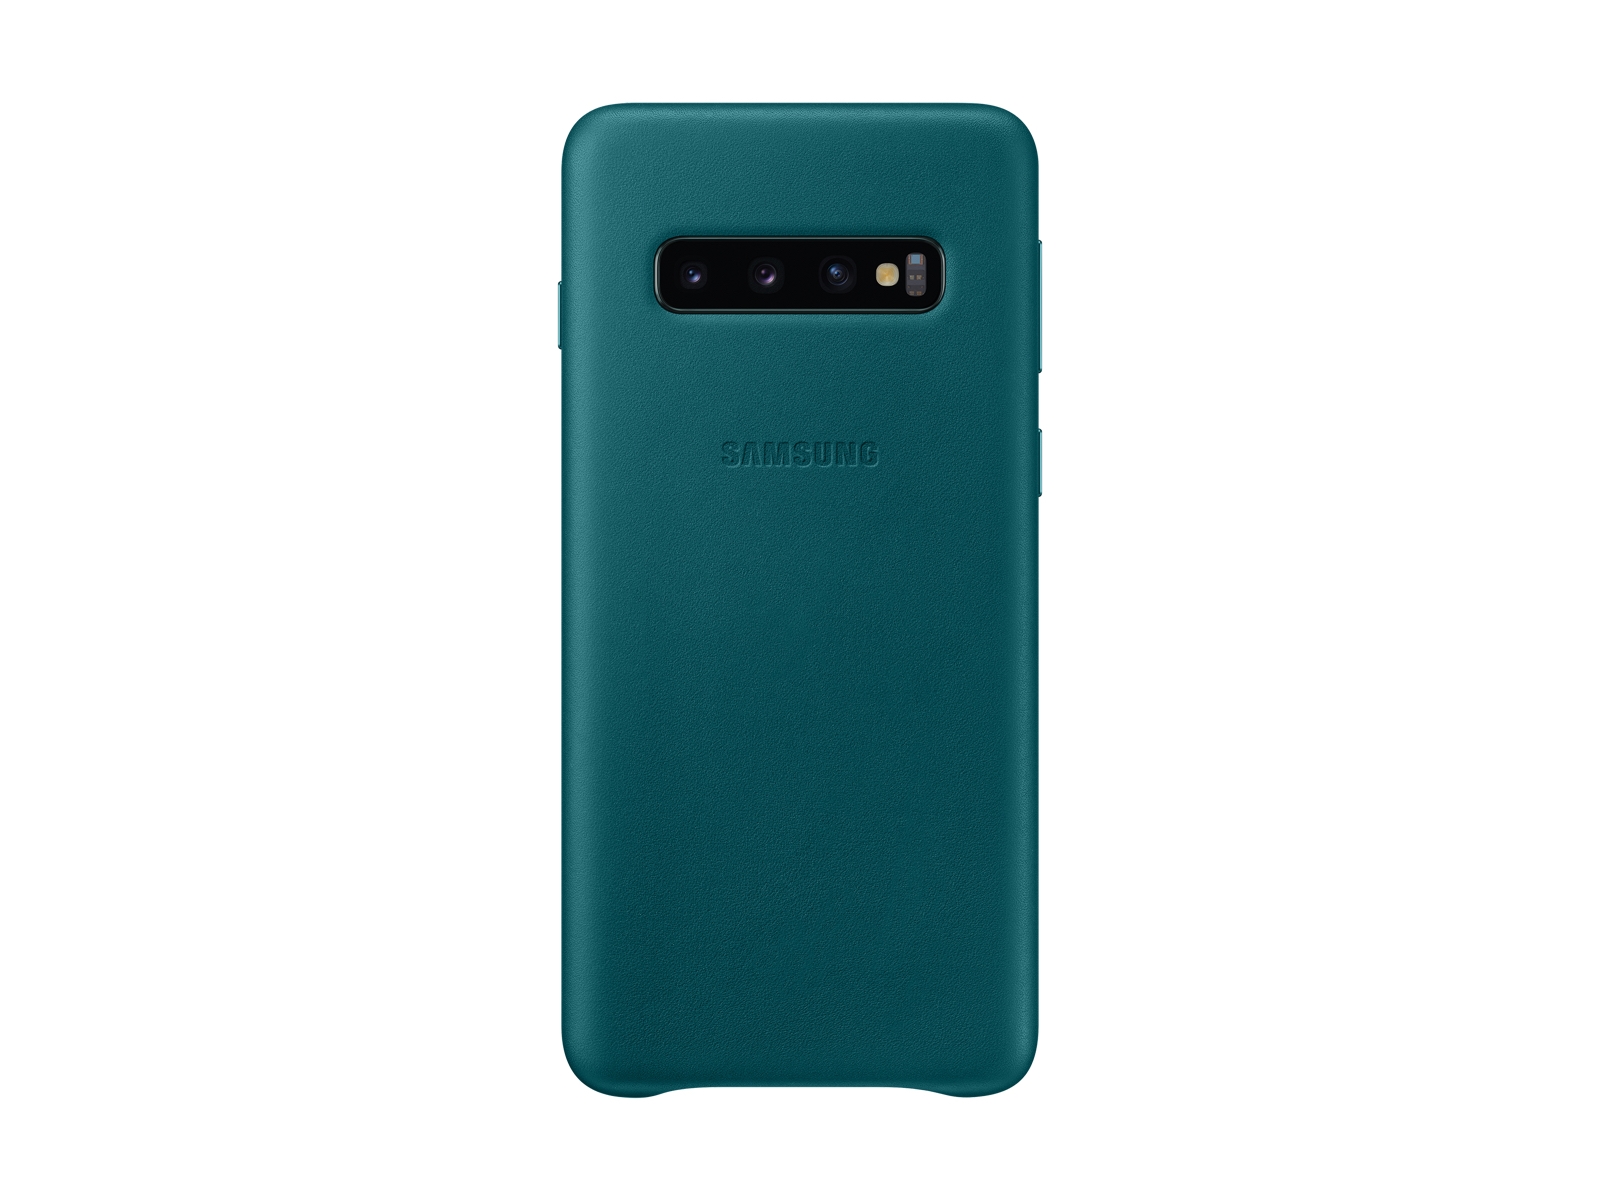 Galaxy S10 Accessories Covers Cases Samsung Us